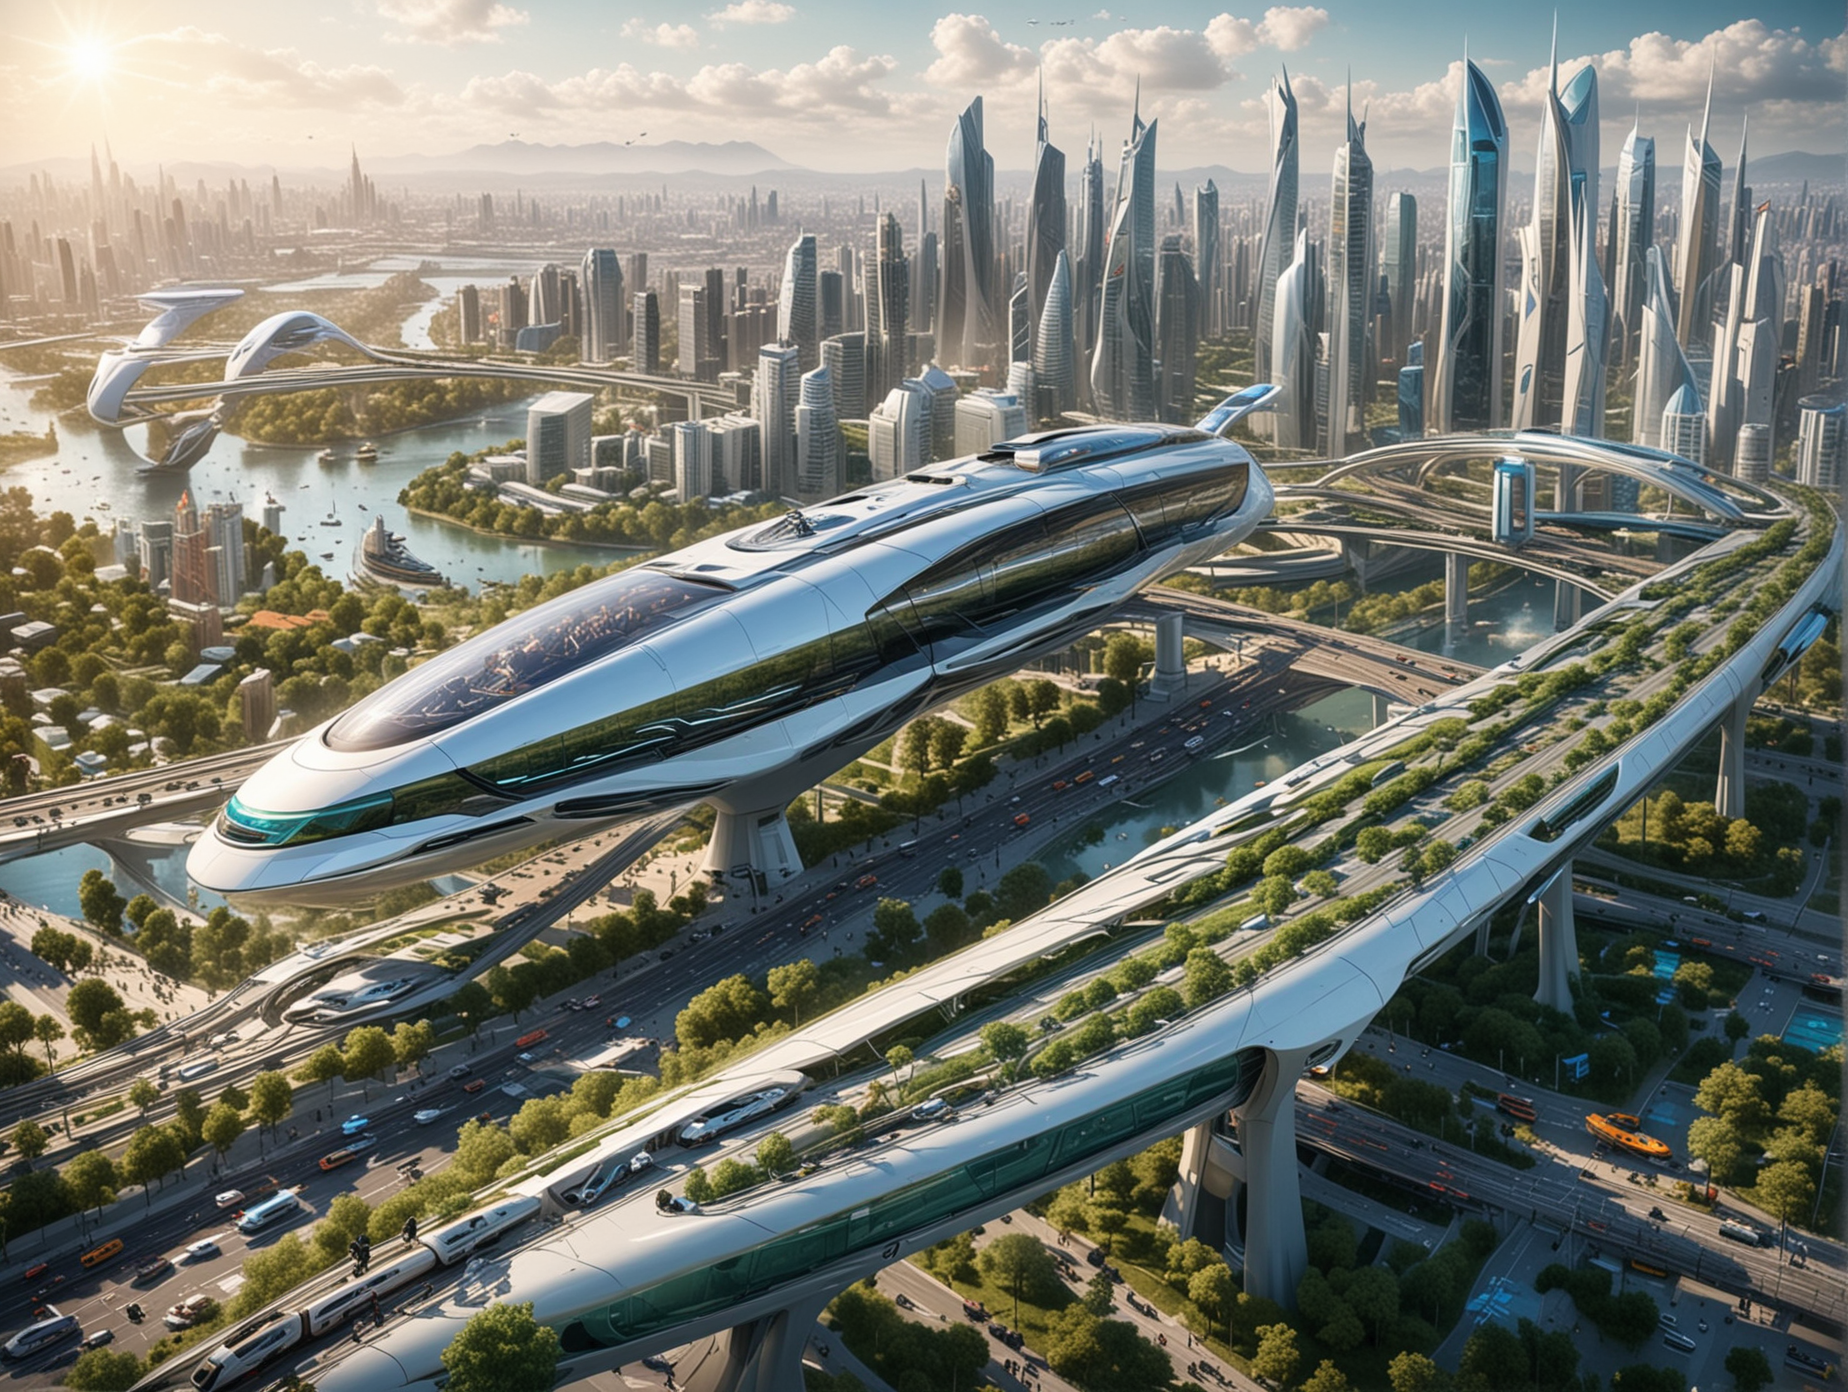 A futuristic city with advanced technology, machines, flying cars, green spaces, parks, futuristic bridges, a central hub with high-speed transportation systems, and futuristic trains and monorails